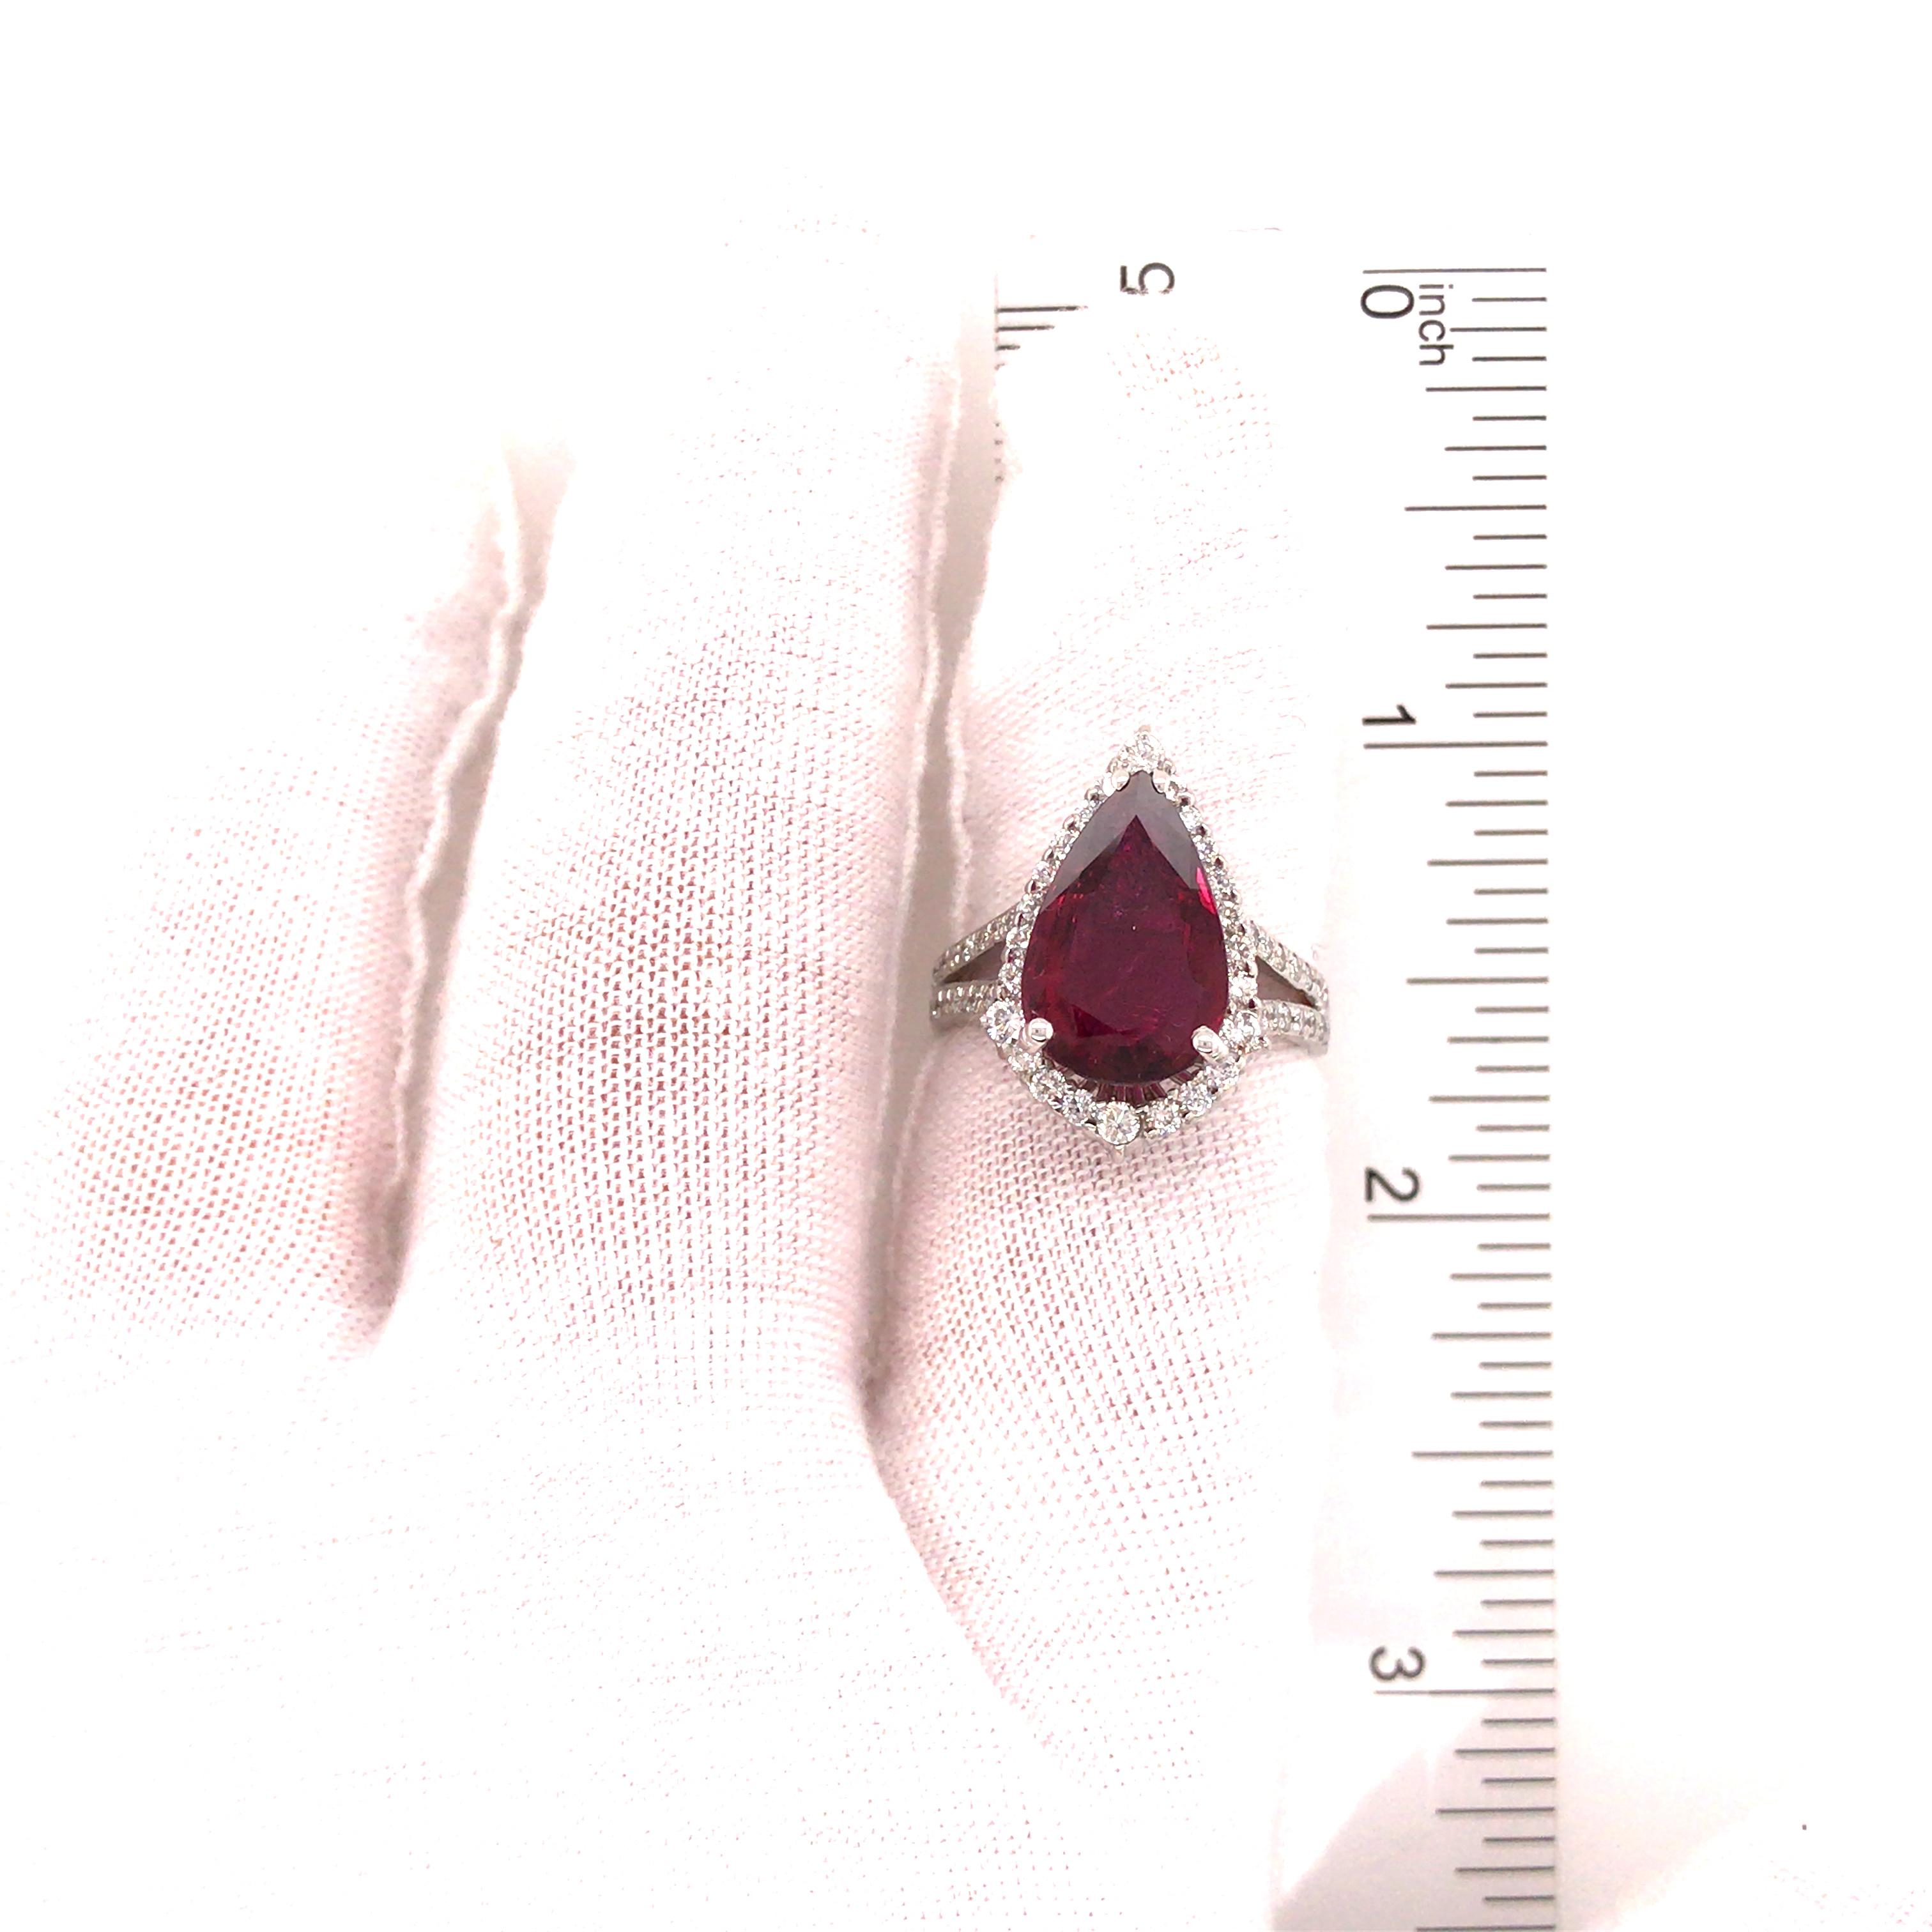 4.71 Carat Pear Shape Ruby and Diamond Halo Ring in 14 Karat White Gold In Good Condition For Sale In Boca Raton, FL